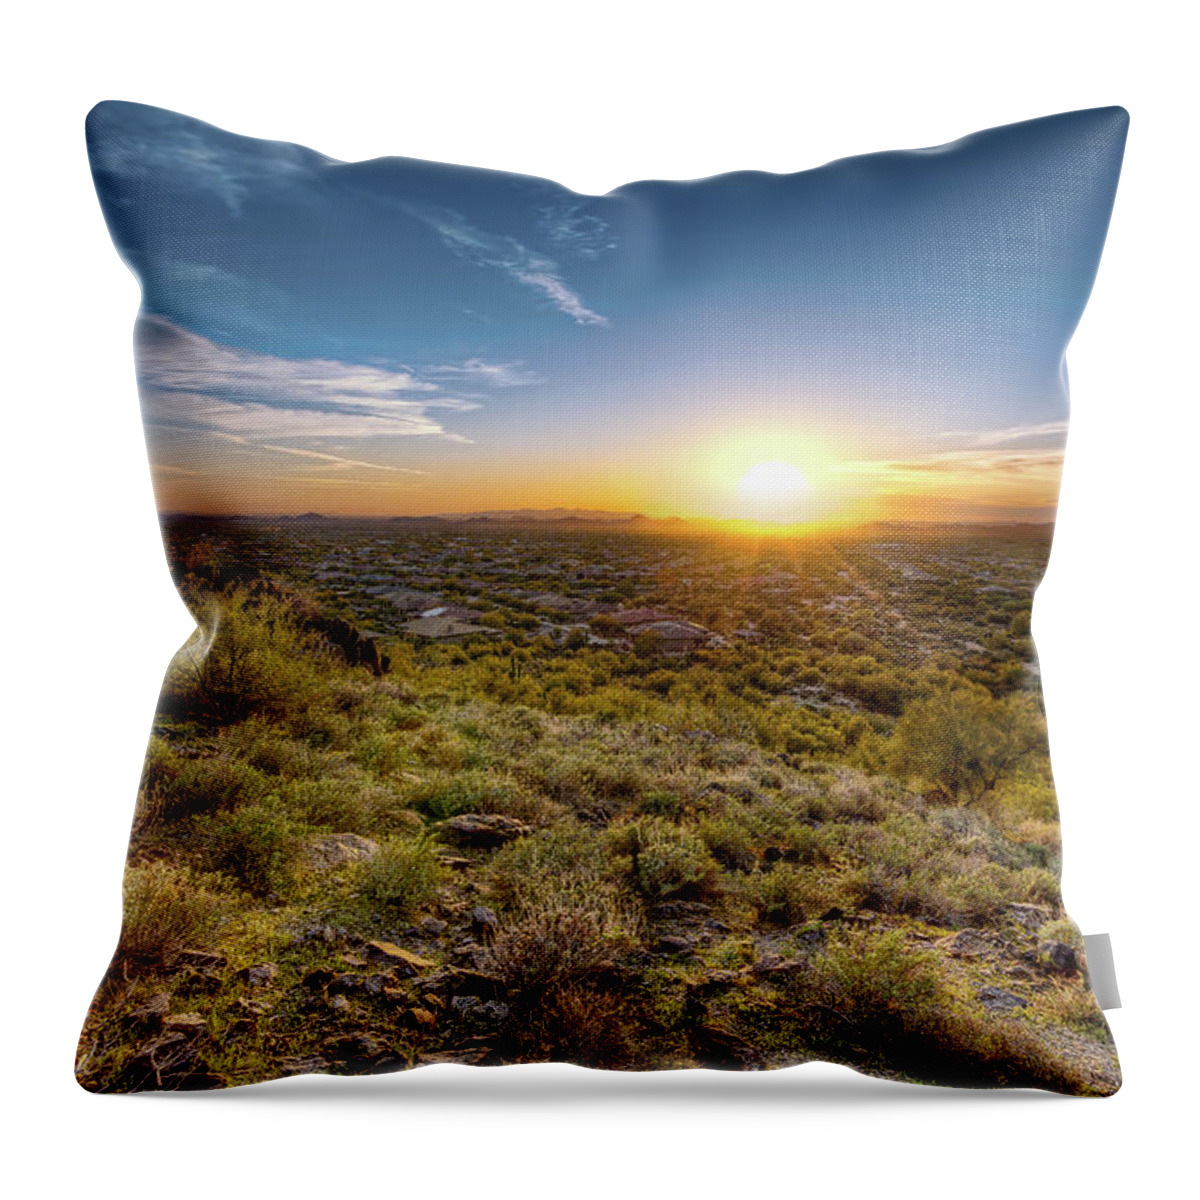 Tranquility Throw Pillow featuring the photograph Sunset Cactus by Cebimagery.com